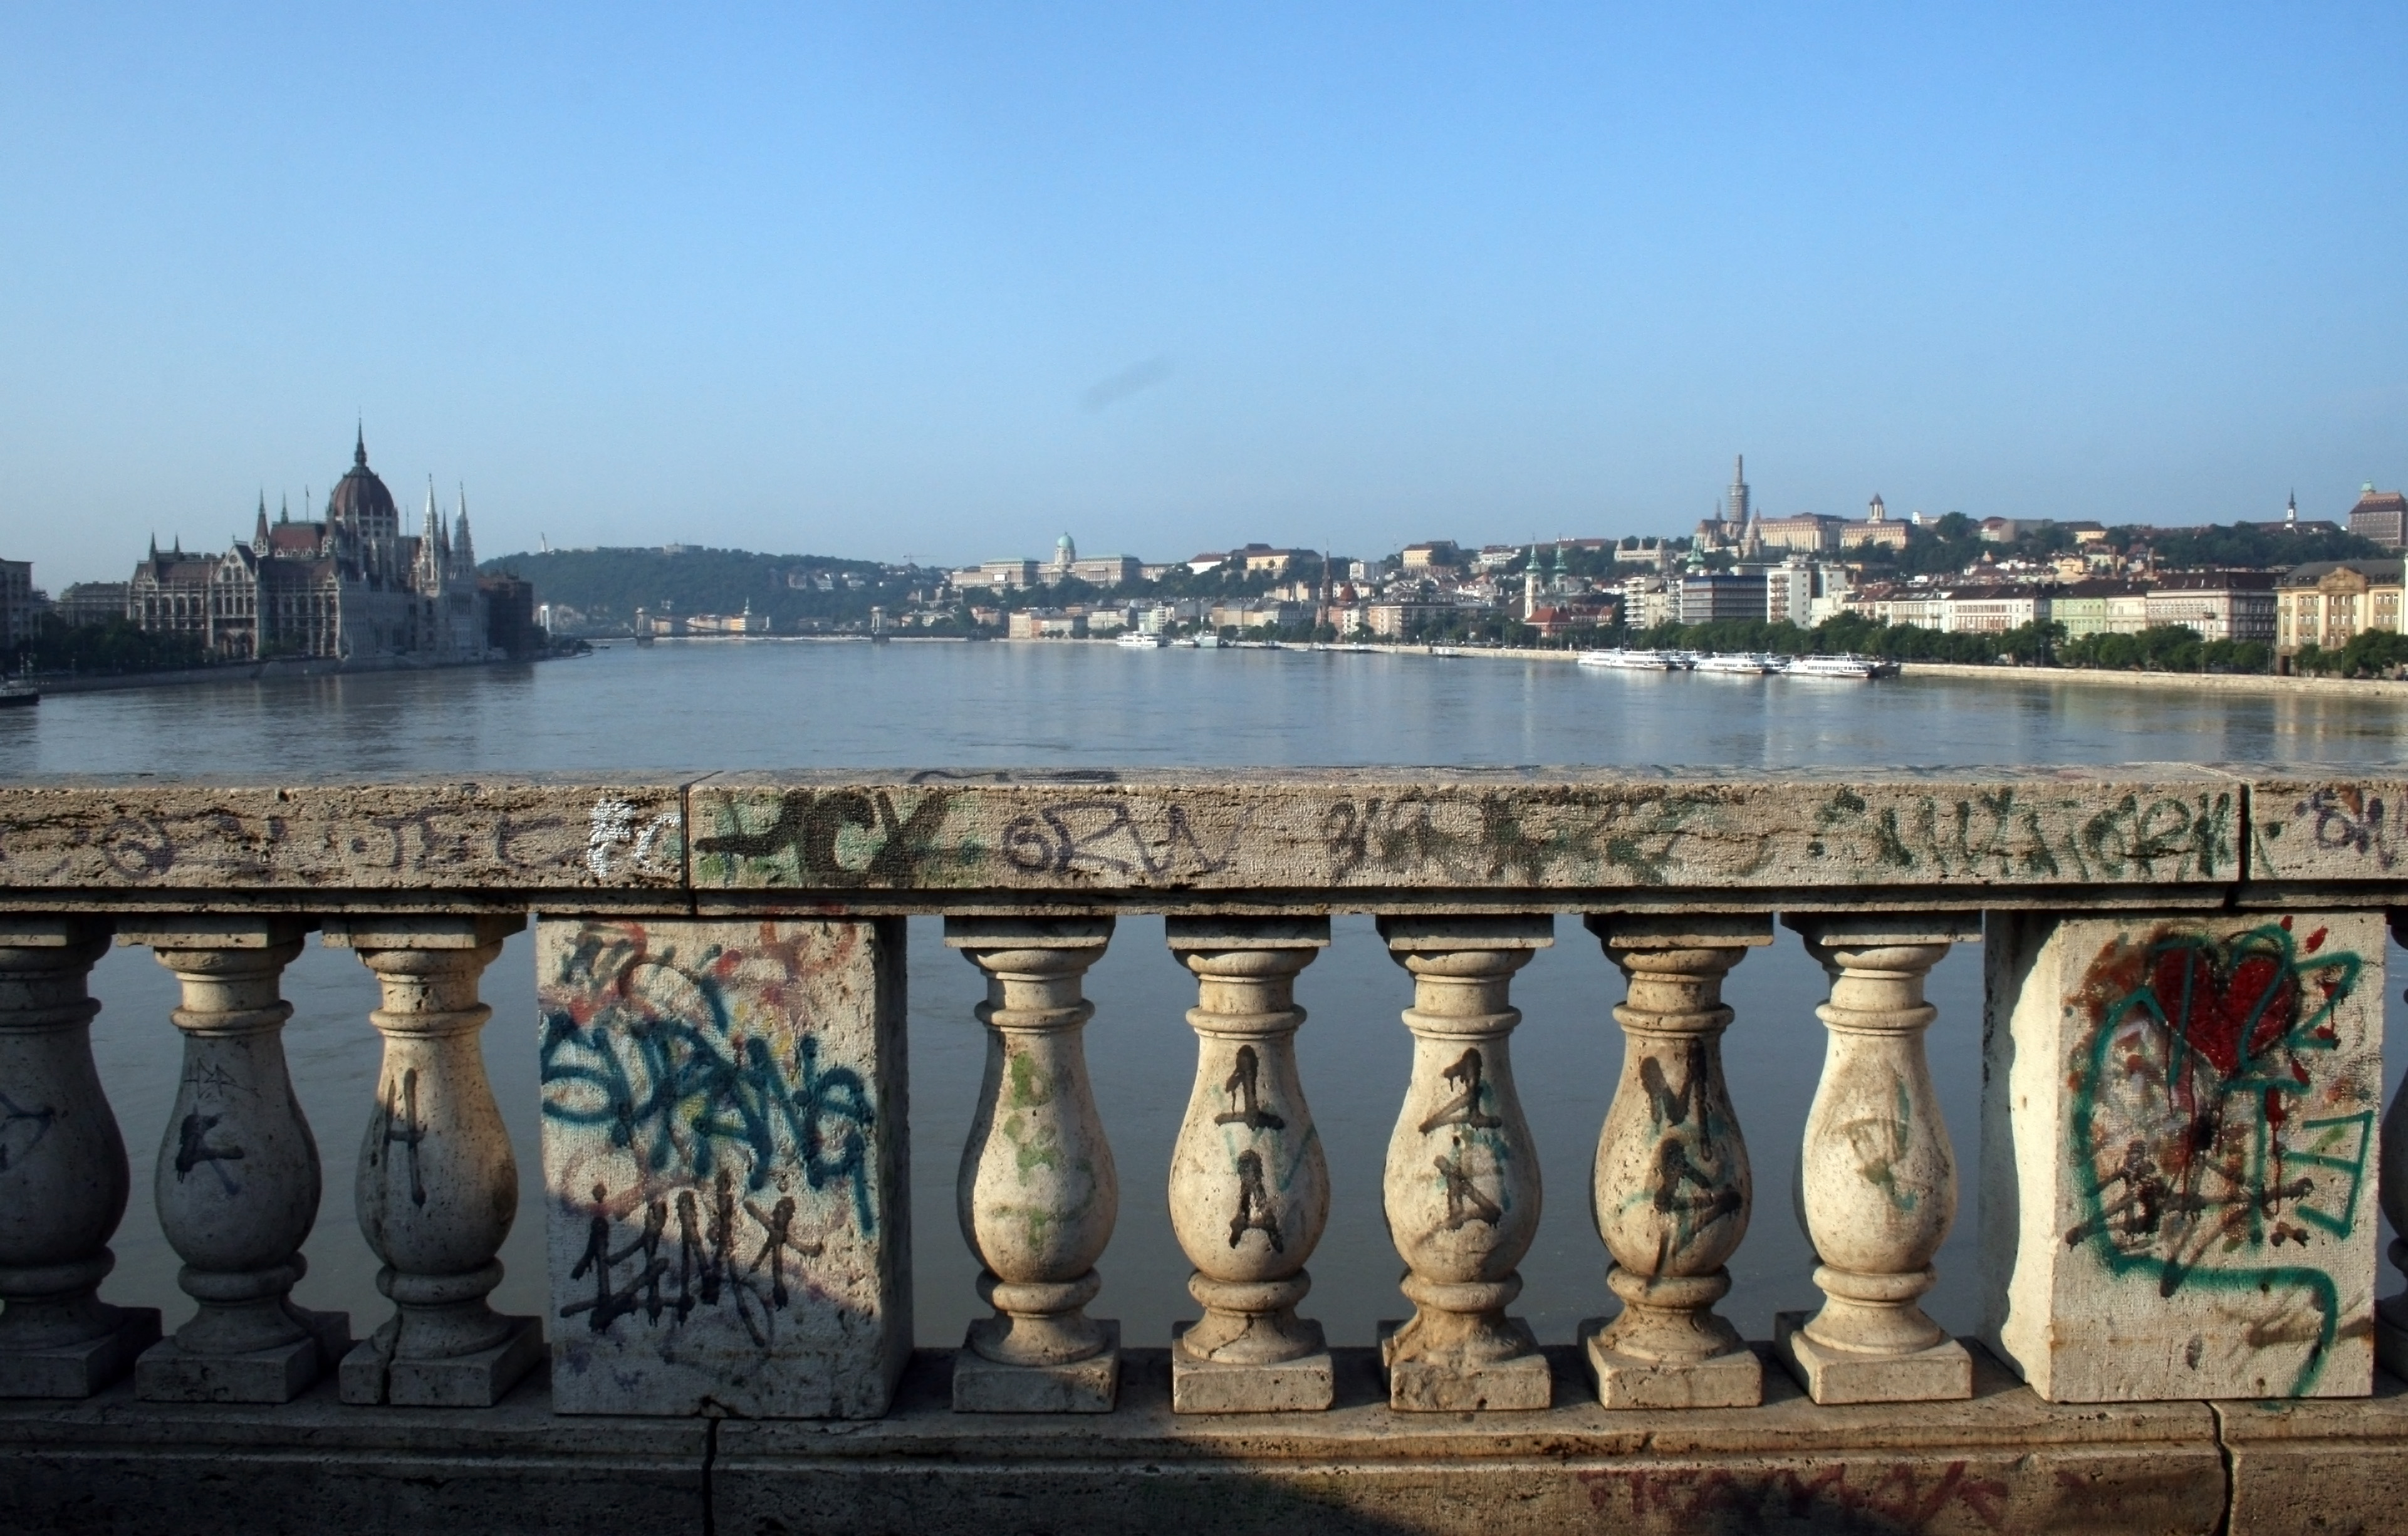 File:View from the balcony with graffitis.JPG - Wikimedia Commons